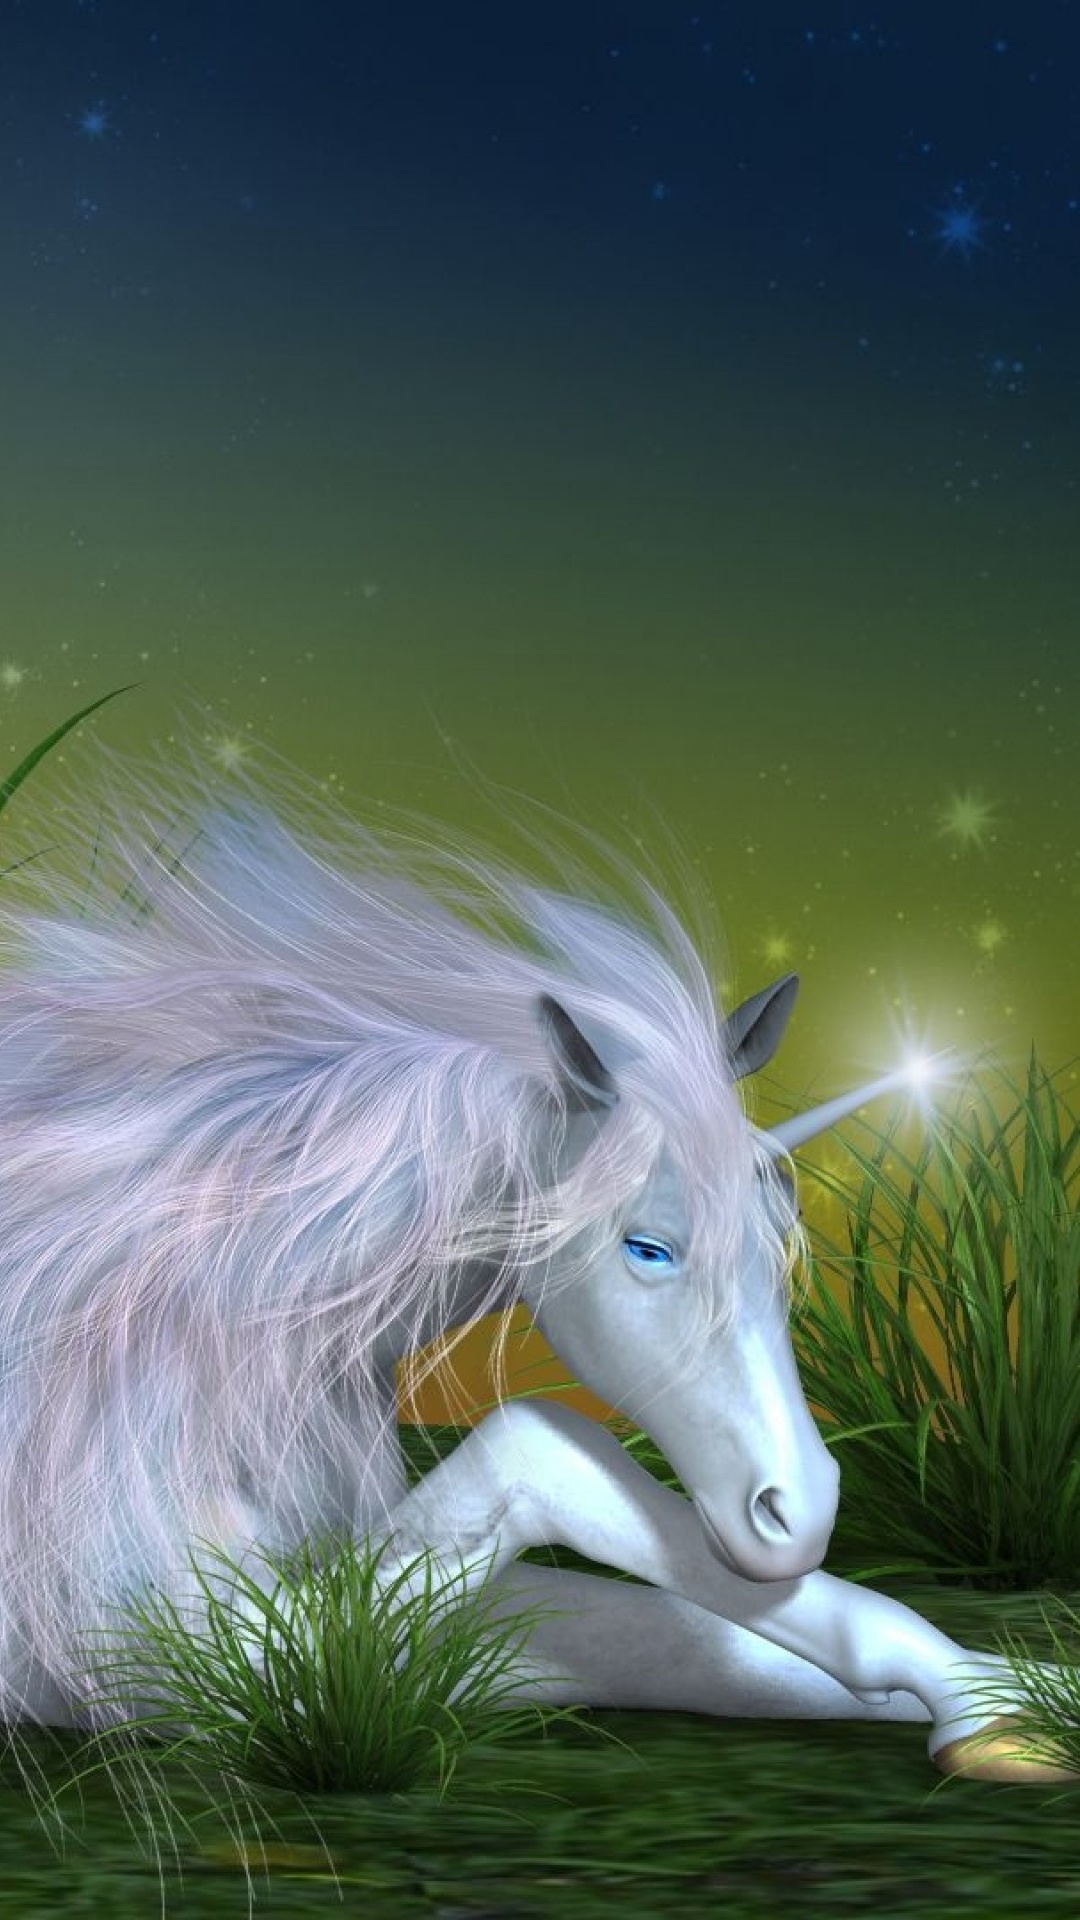 White Long Haired Animal on Green Grass. Wallpaper in 1080x1920 Resolution